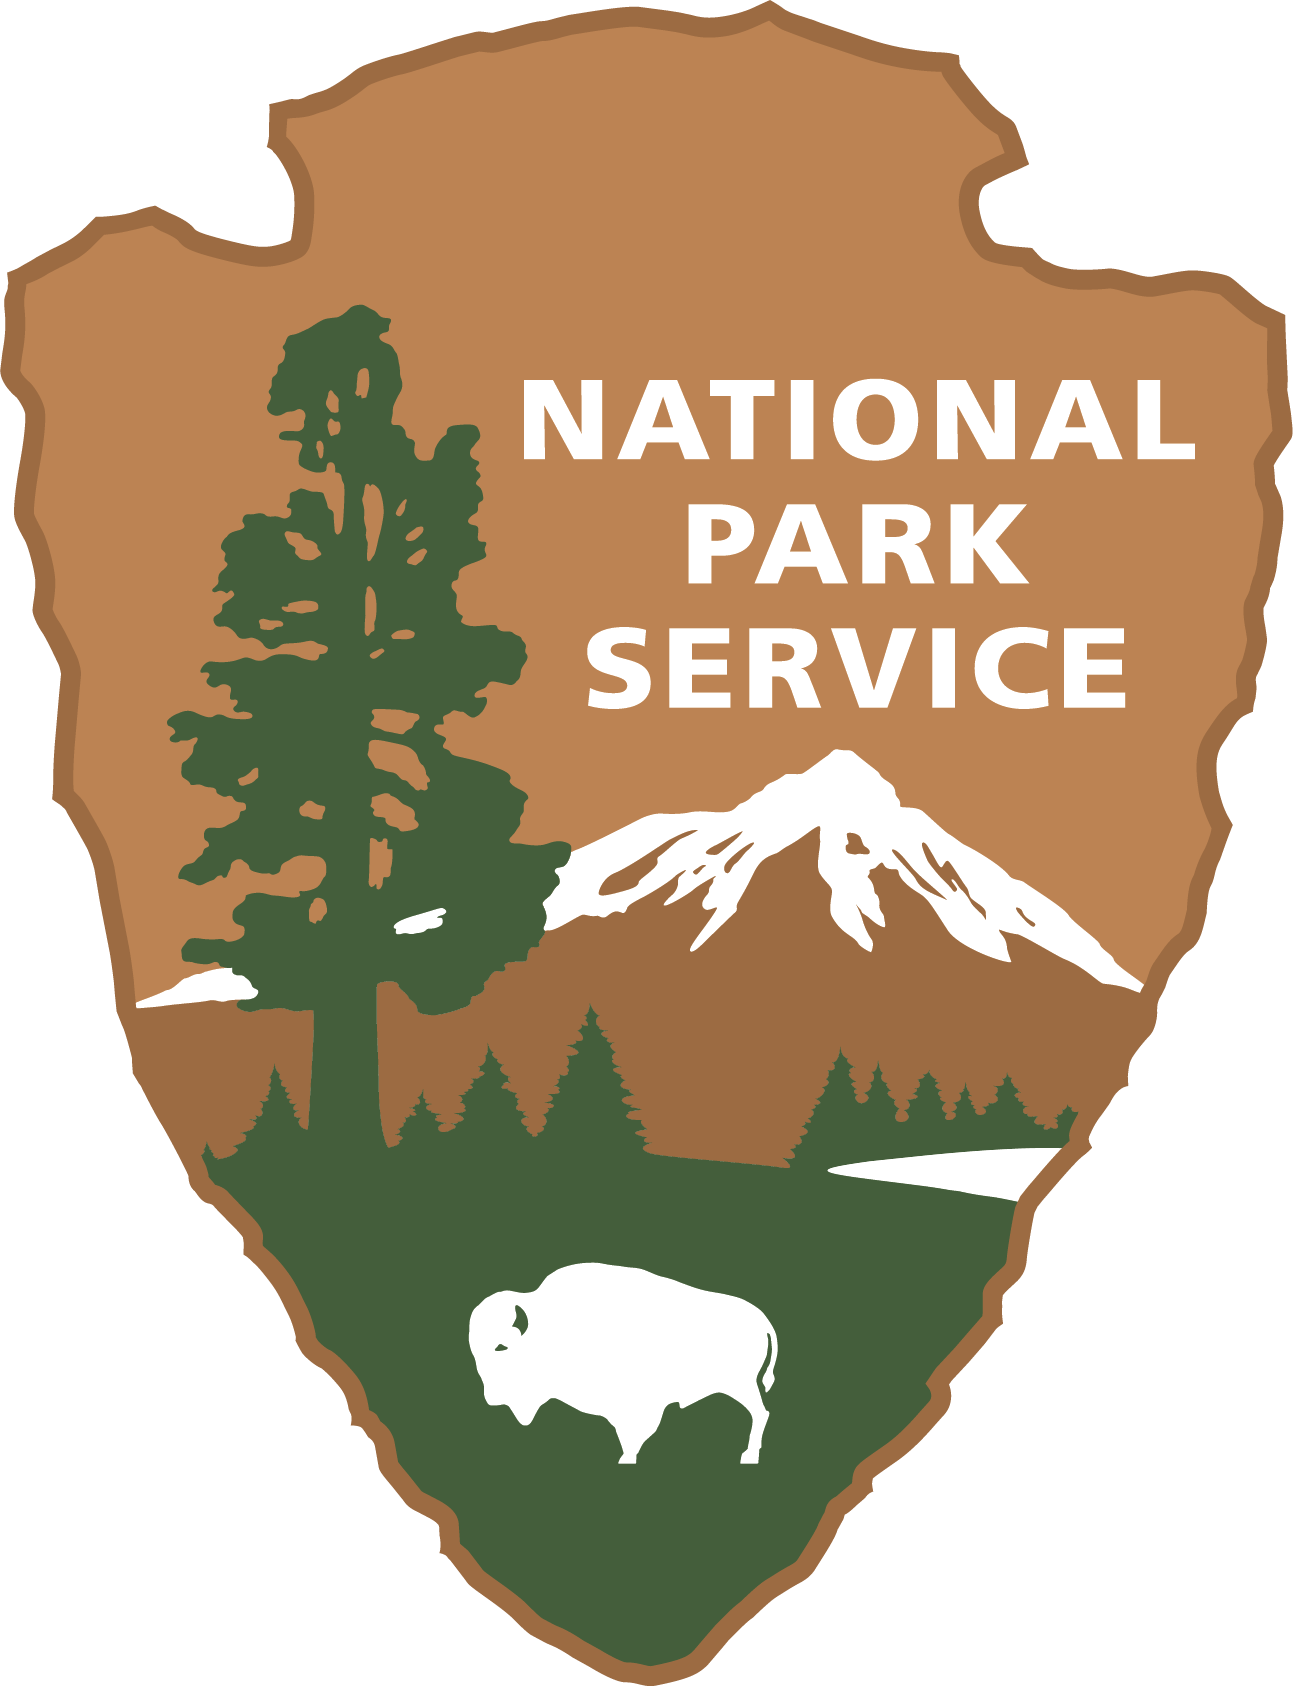 The brown and green NPS arrowhead logo on a white background.